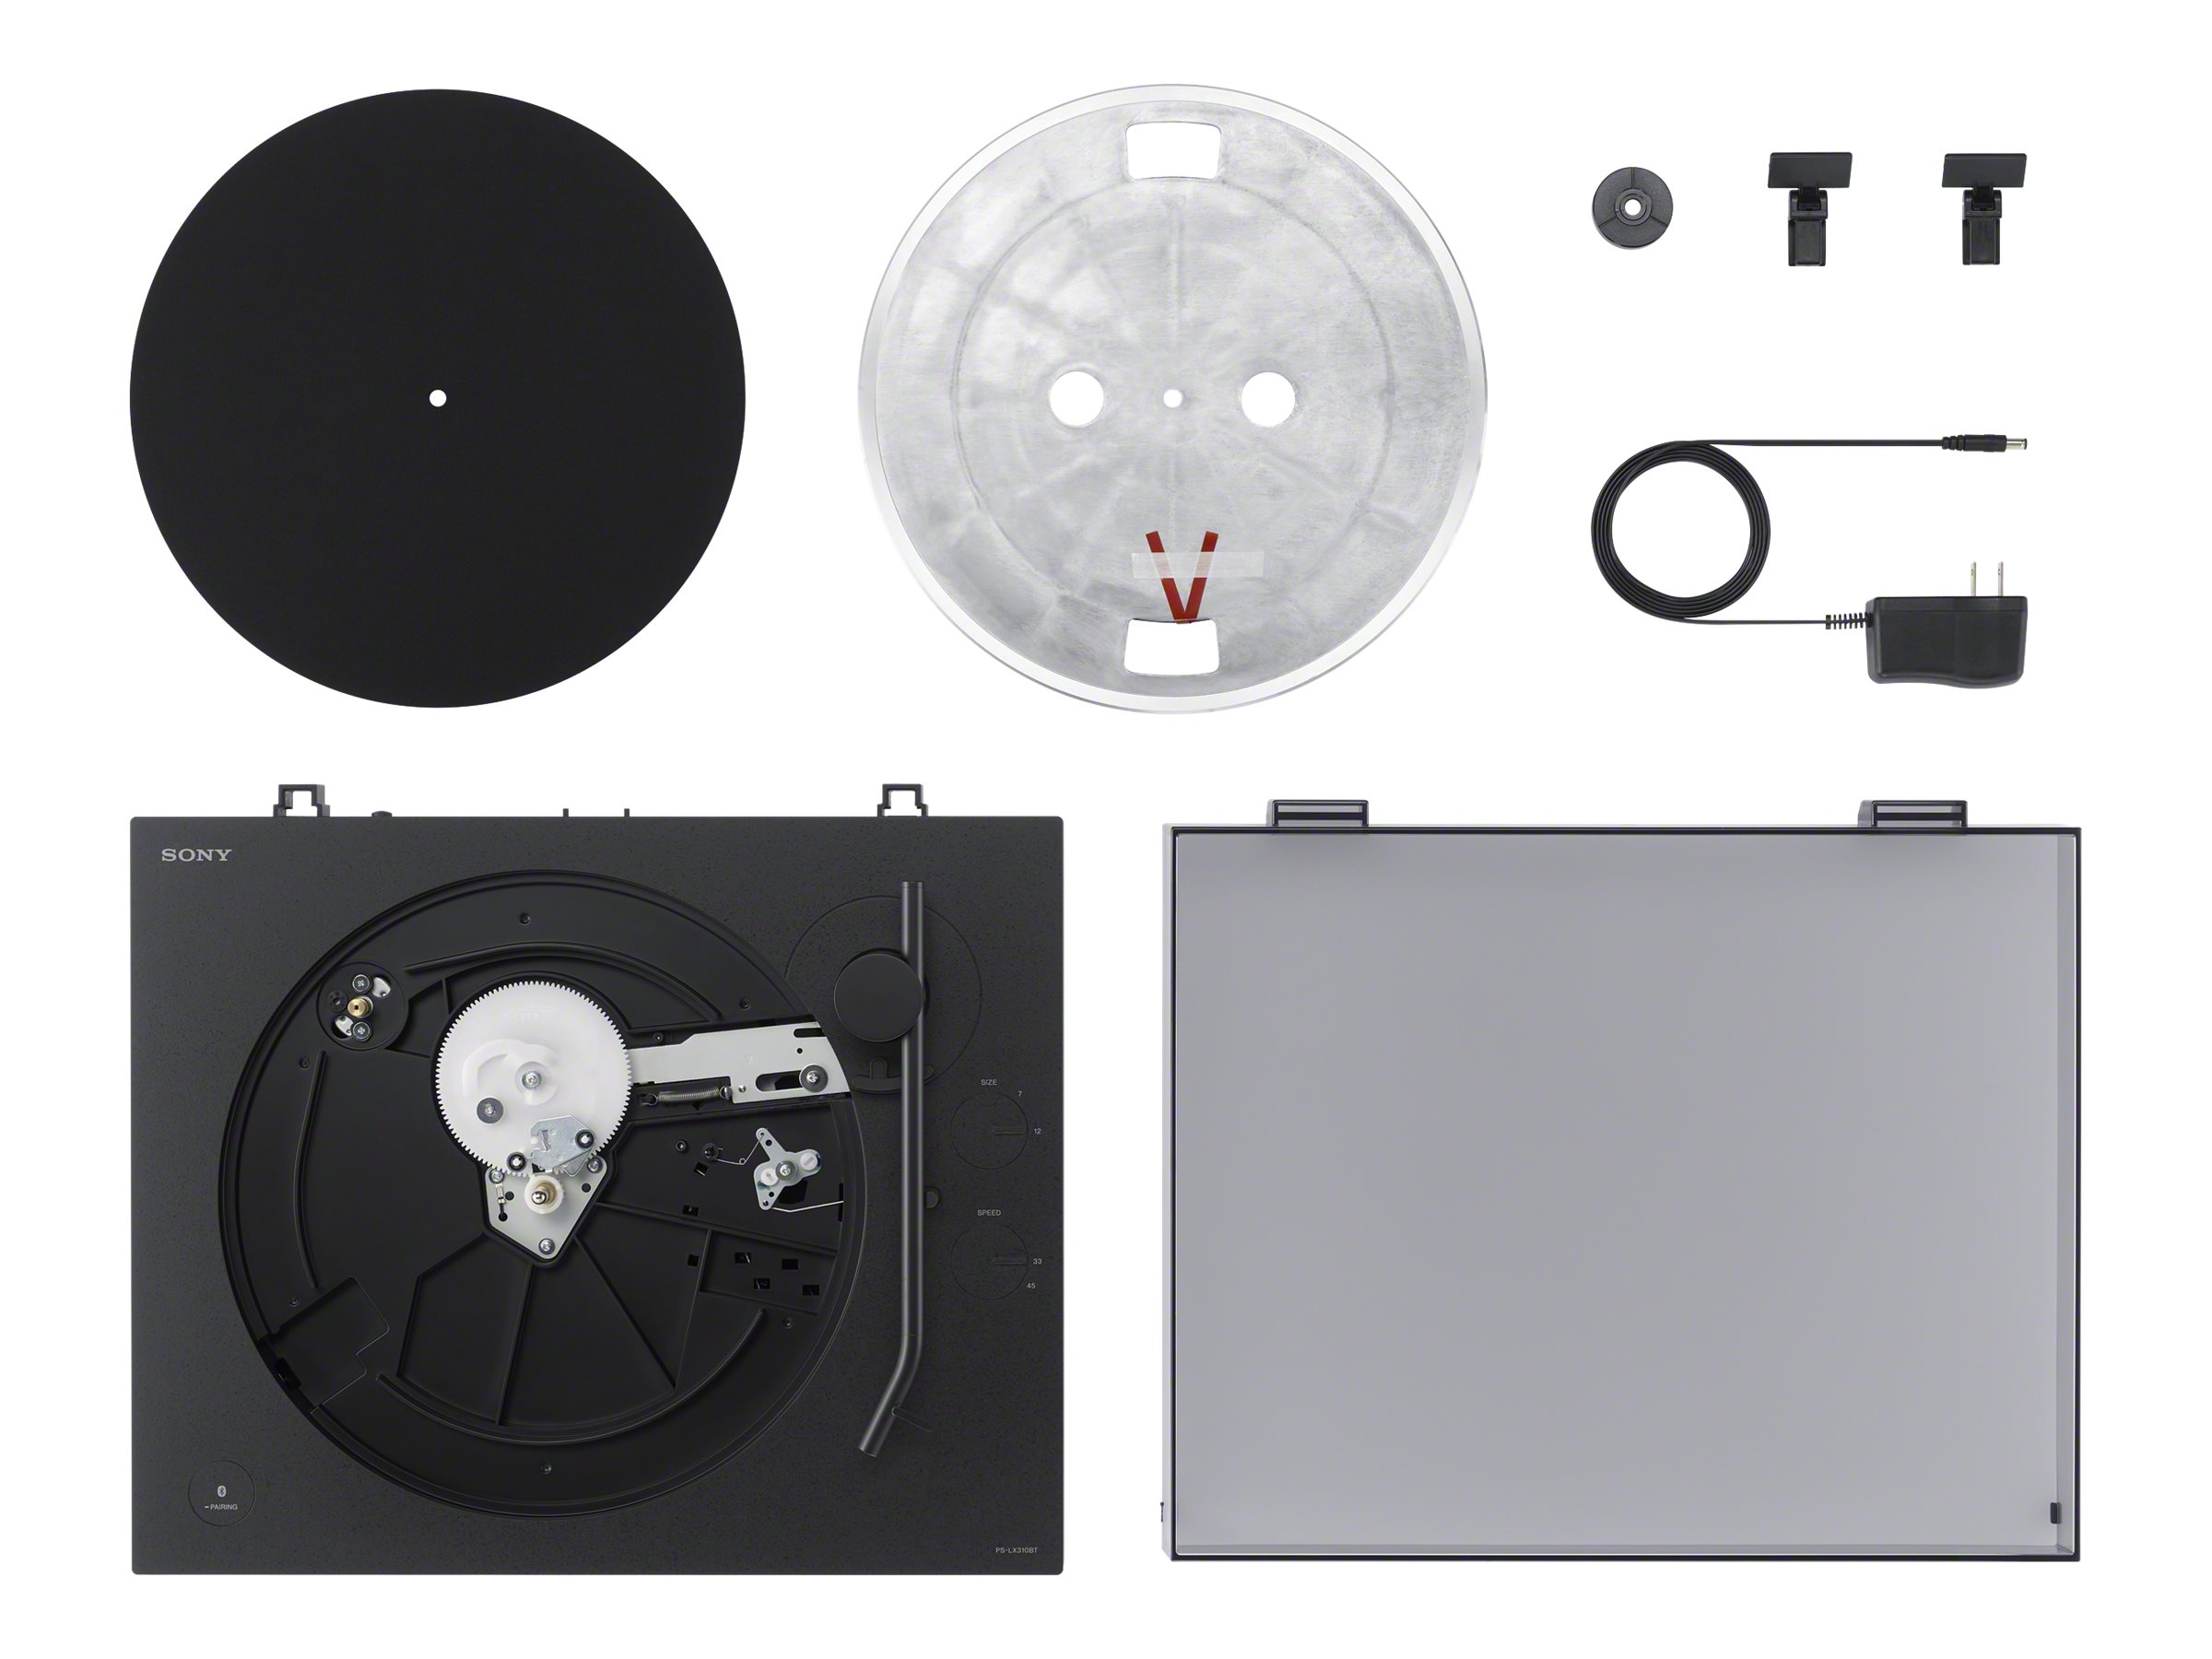 Sony PS-LX310BT Turntable Review: Stylish, Bluetooth, Automatic, Affordable